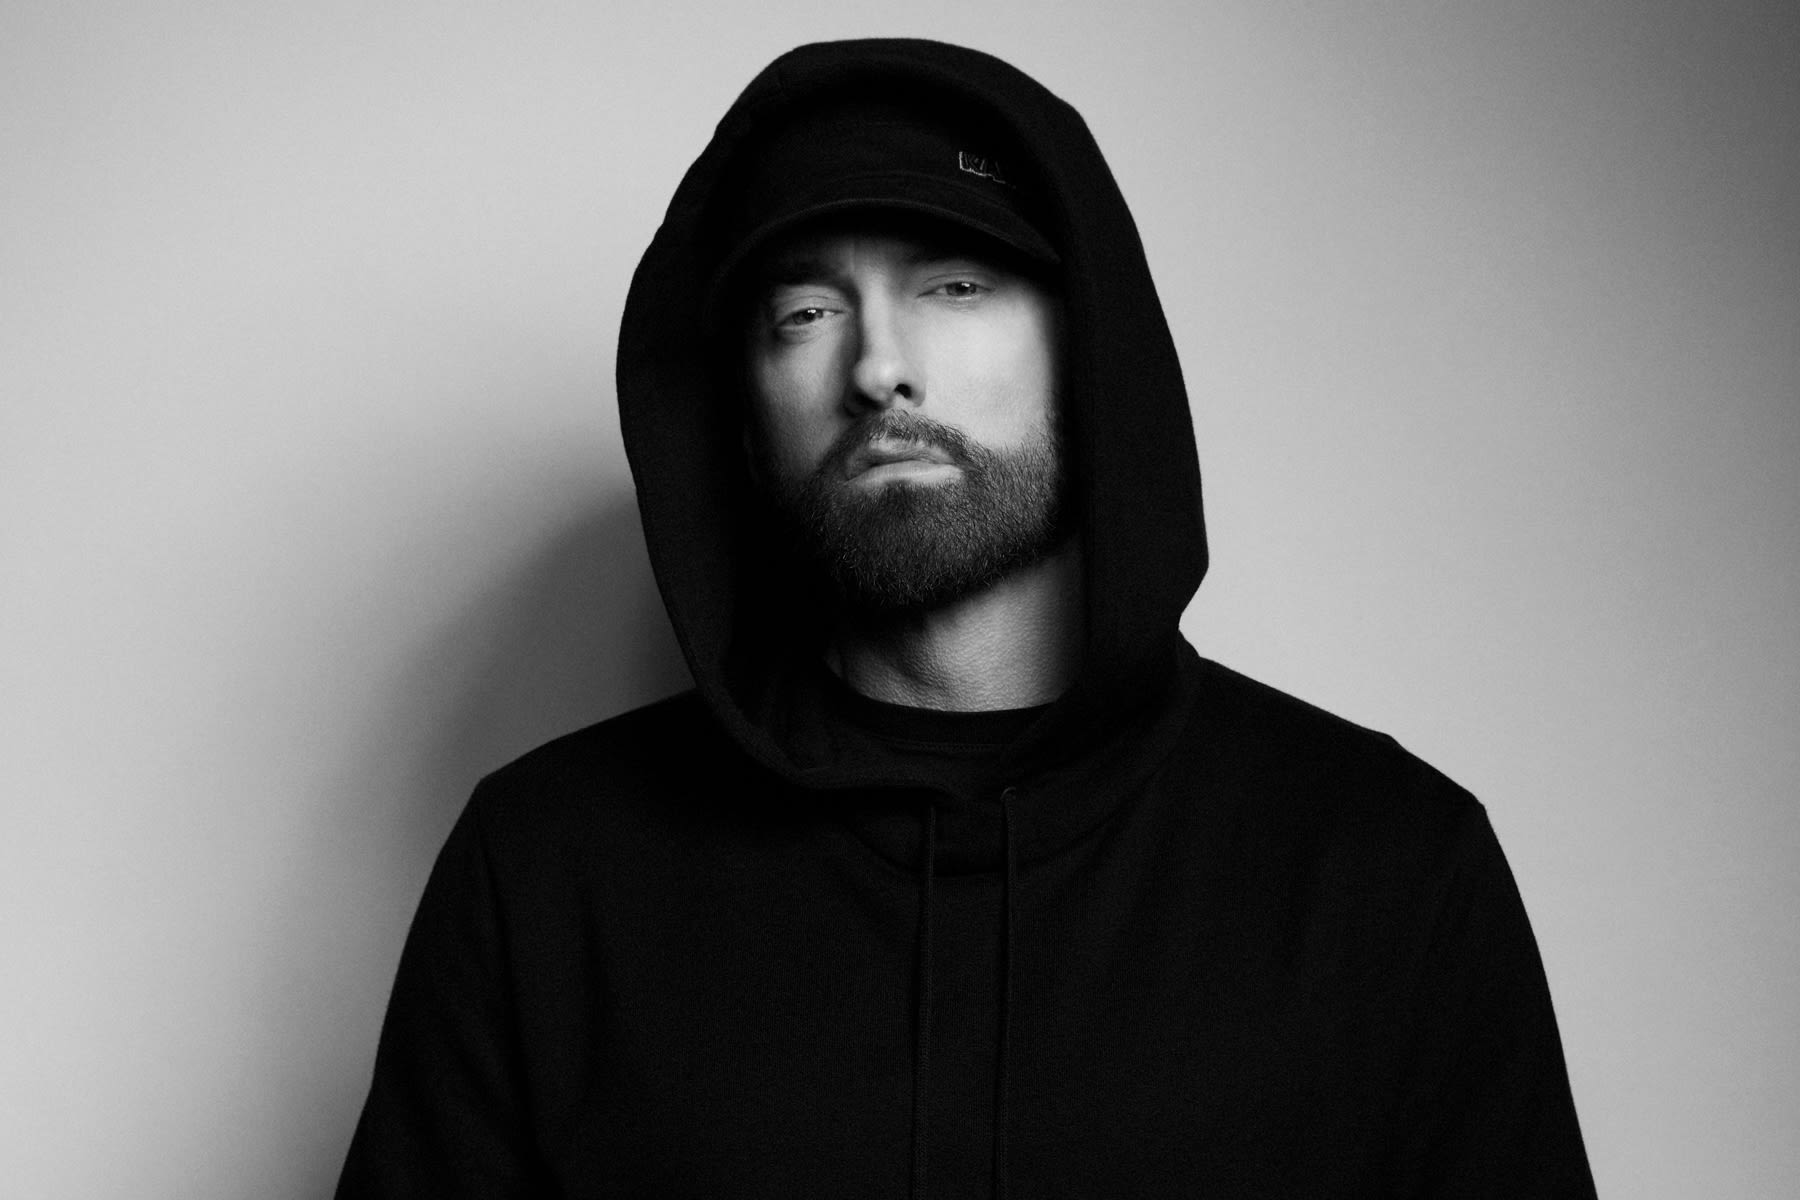 Eminem Put the Final Nail in His Alter Ego’s Coffin: ‘The Death Of Slim Shady (Coup De Grâce)’ Is Here